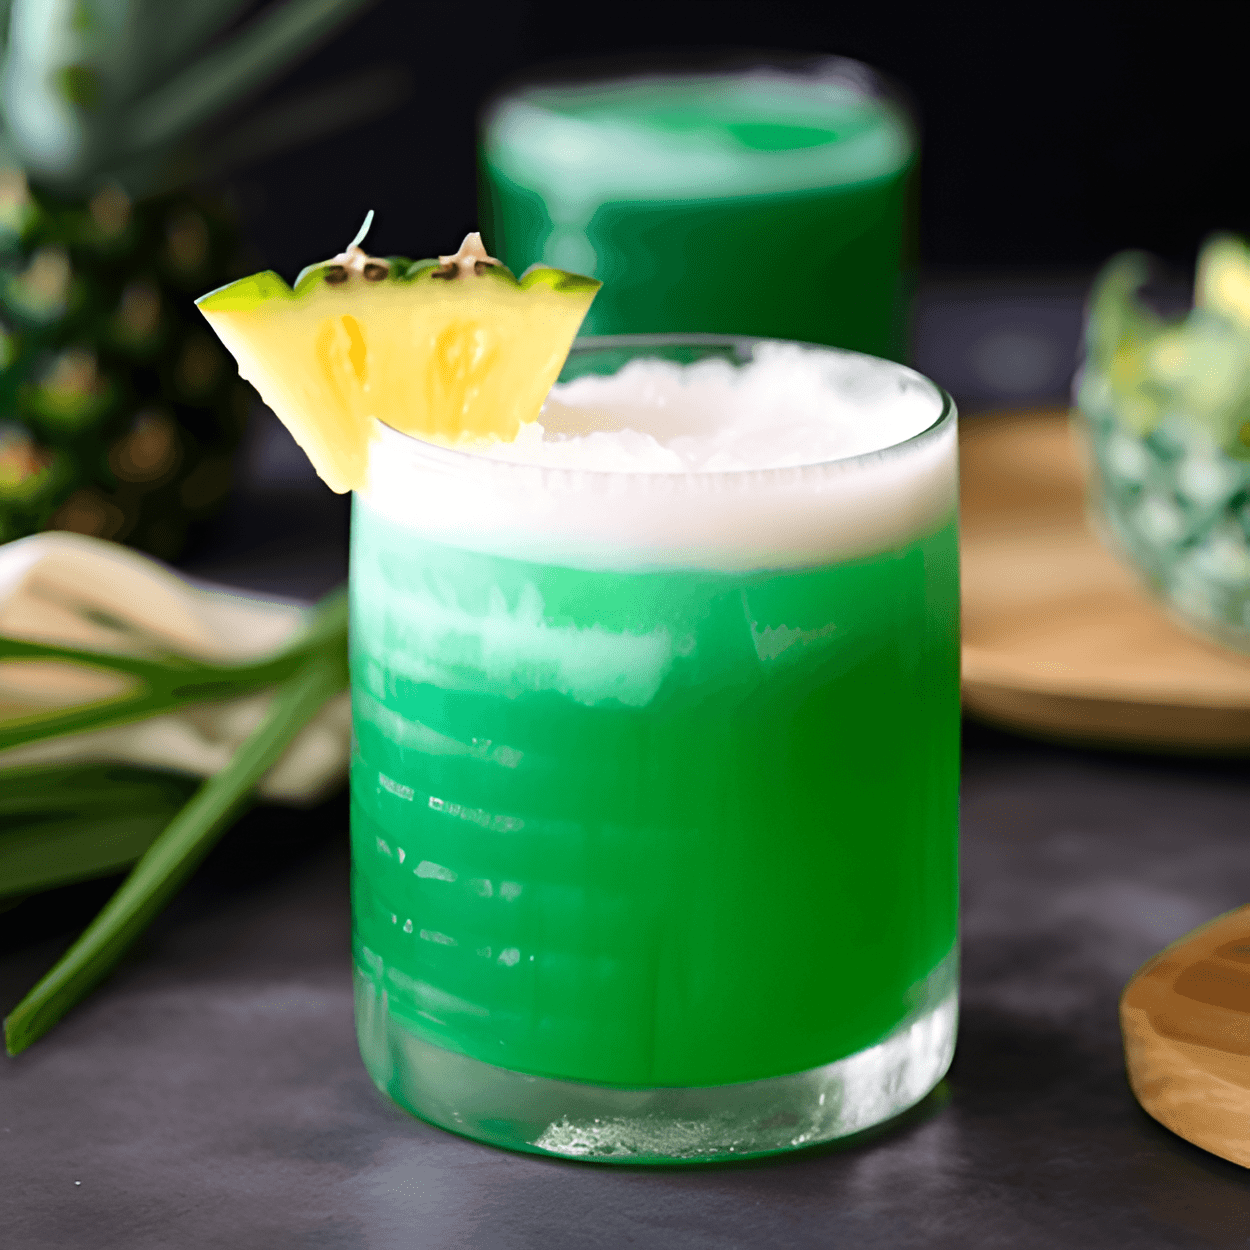 Beetlejuice Cocktail Recipe - The Beetlejuice cocktail is a sweet, fruity concoction with a tropical twist. The pineapple juice and melon liqueur give it a refreshing, tangy flavor, while the vodka adds a kick of strength. The overall taste is smooth, vibrant, and delightfully exotic.